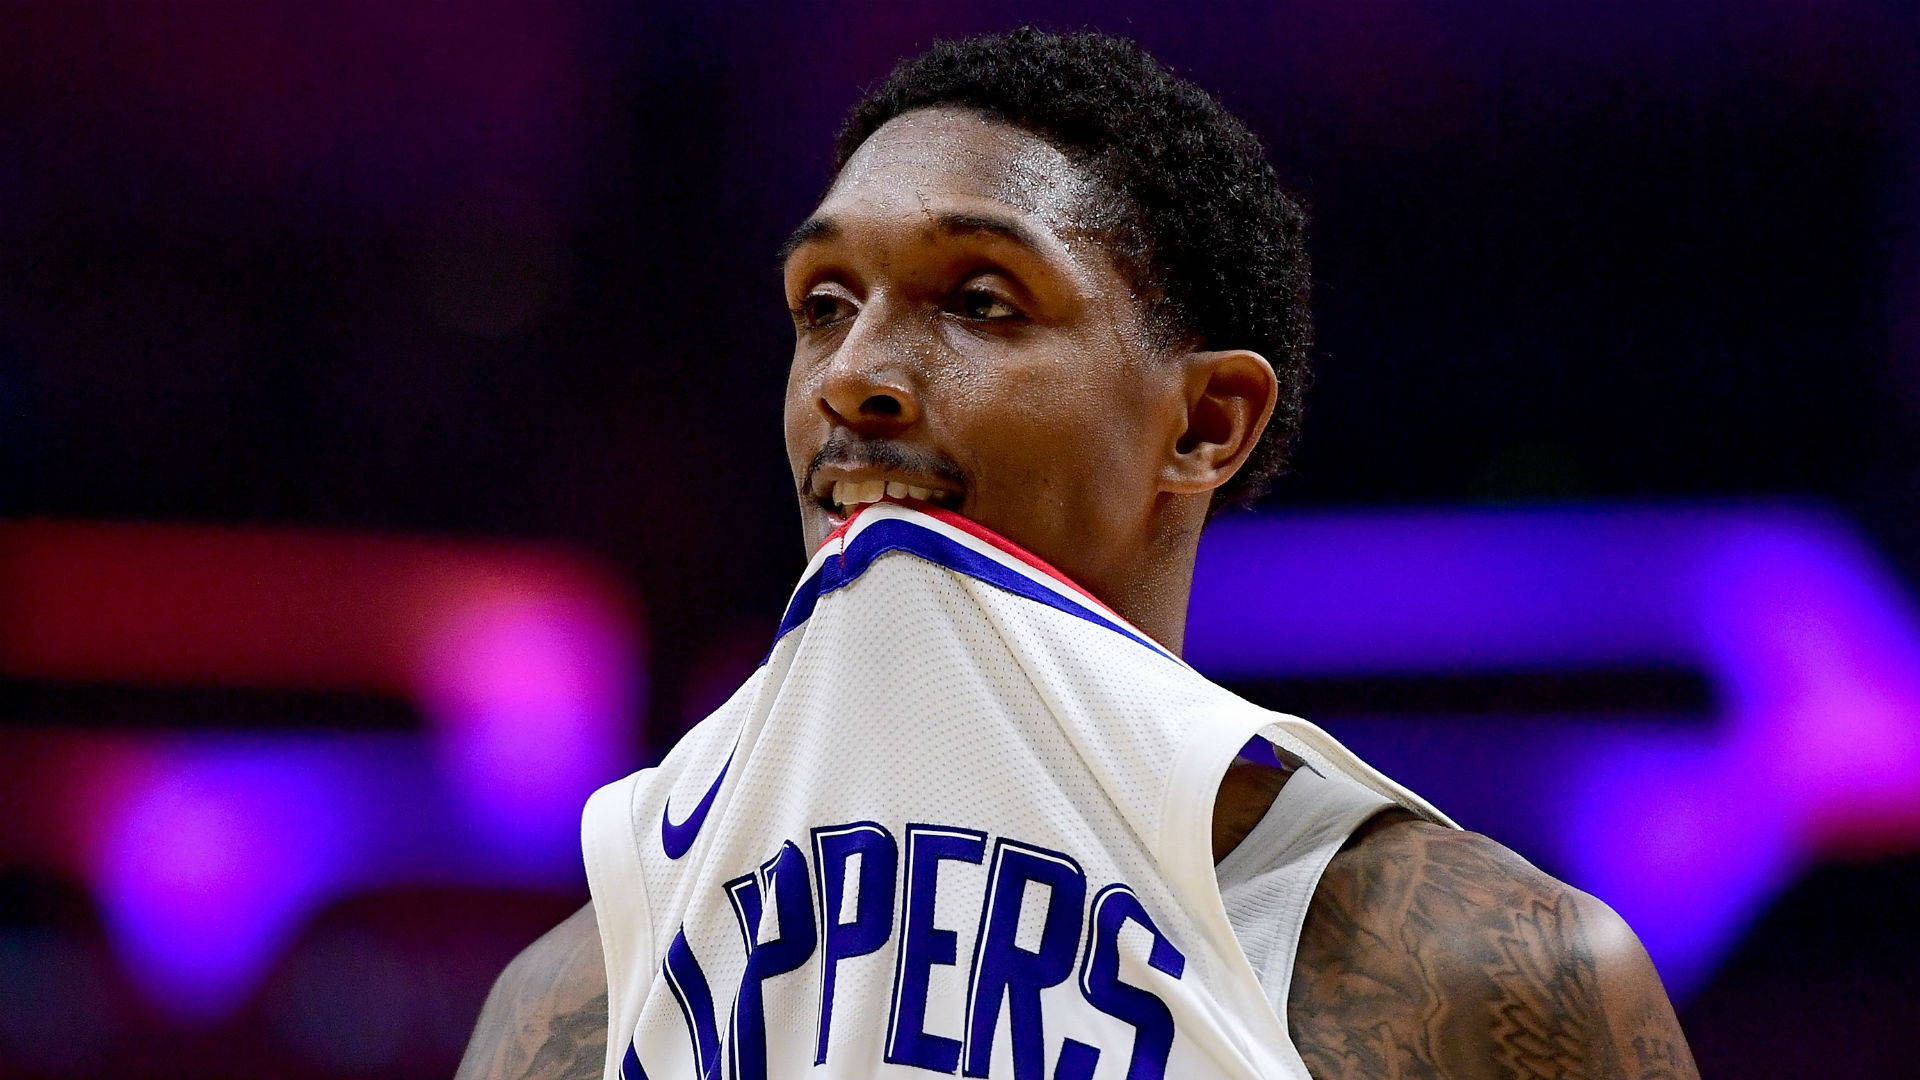 Lou Williams Bitting His Jersey Background